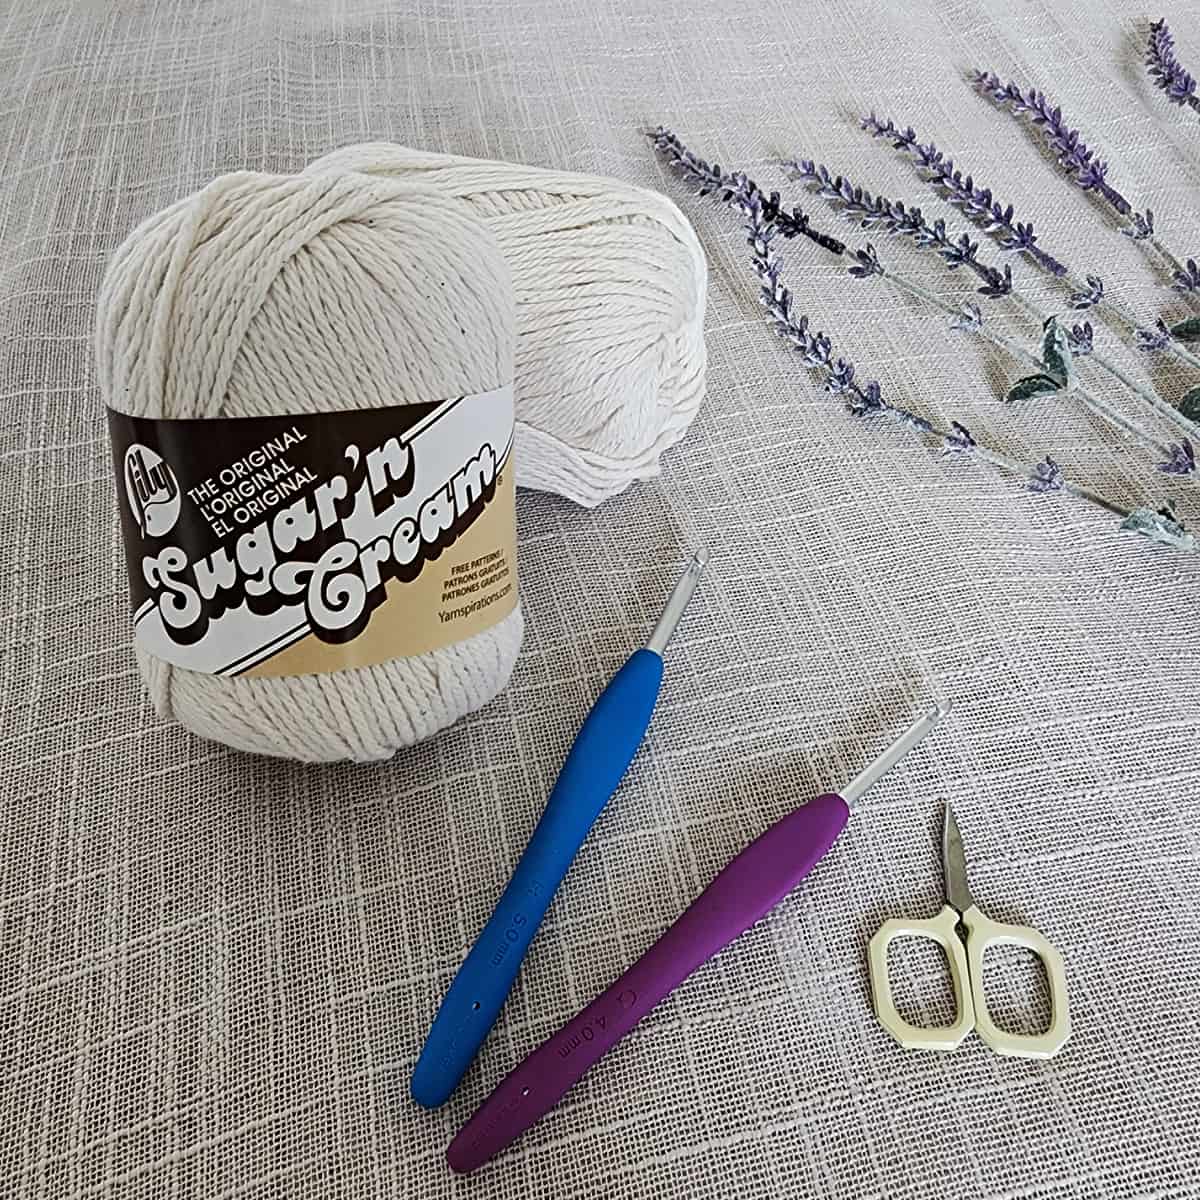 Two balls of ecru yarn laying on a cloth surface with crochet hooks, scissors, and a floral sprig.